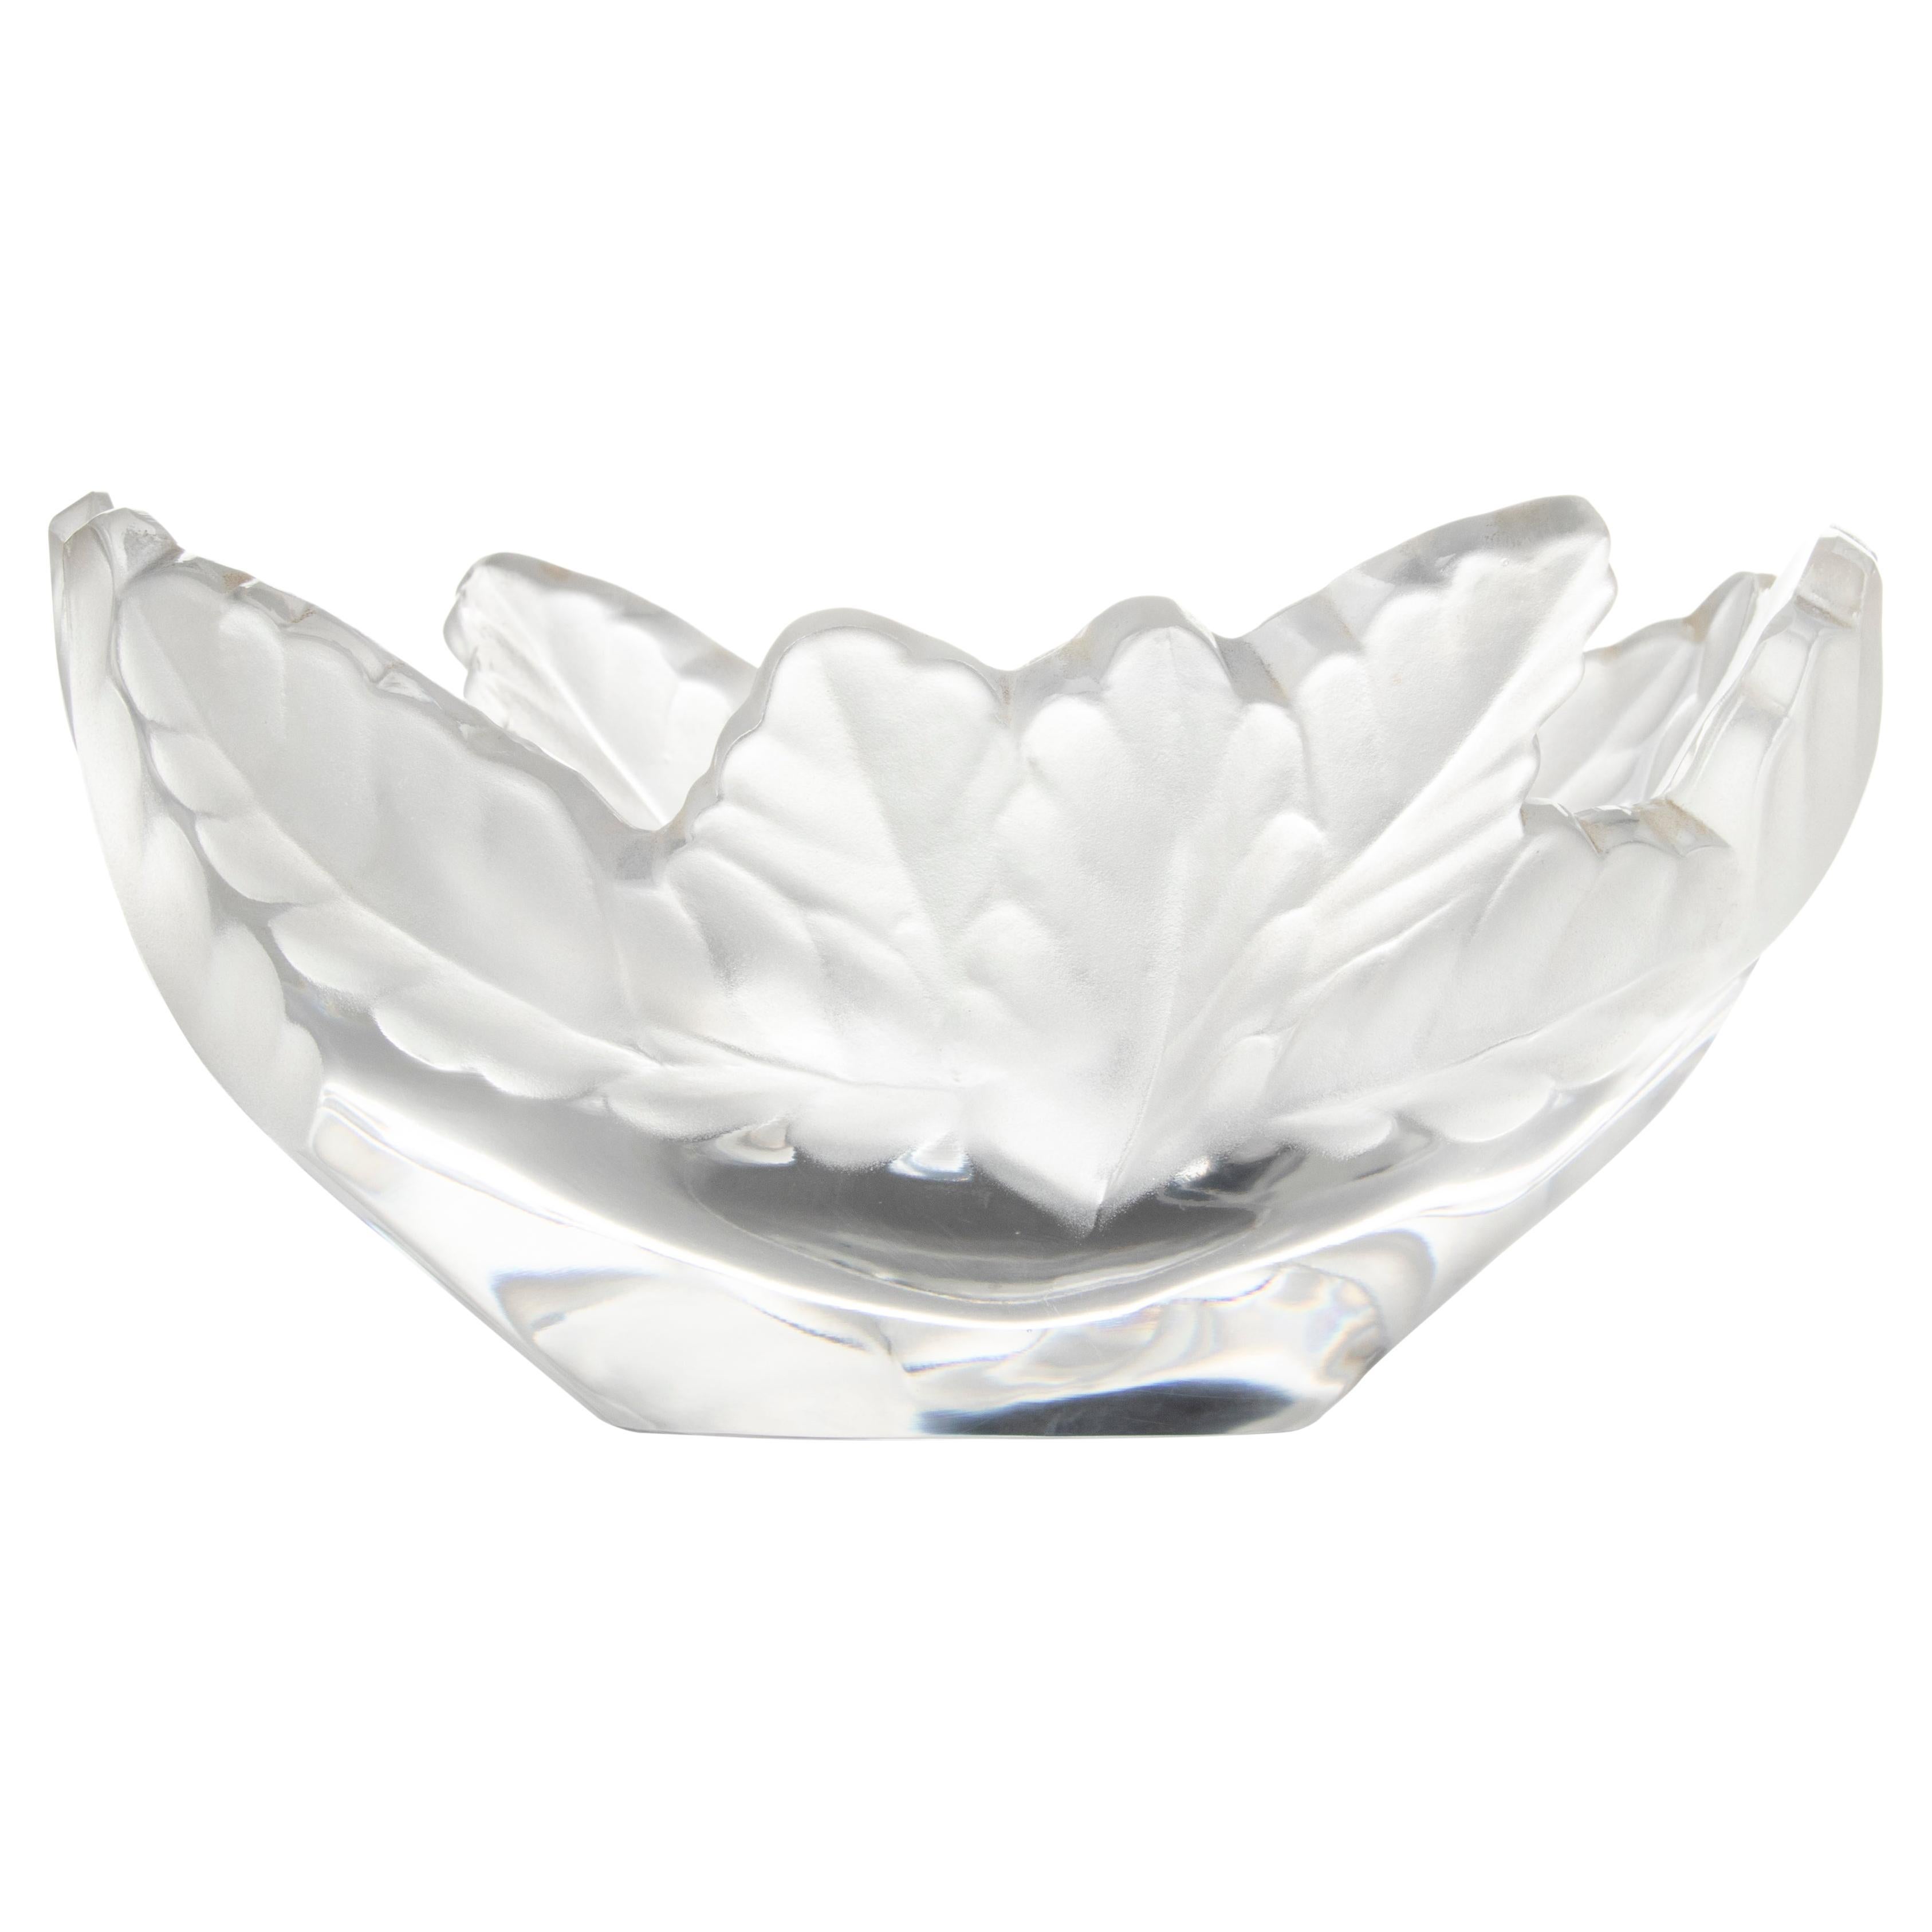 Mid 20th Century Modern Frosted Crystal Bowl by Lalique Model "Compiegne" For Sale